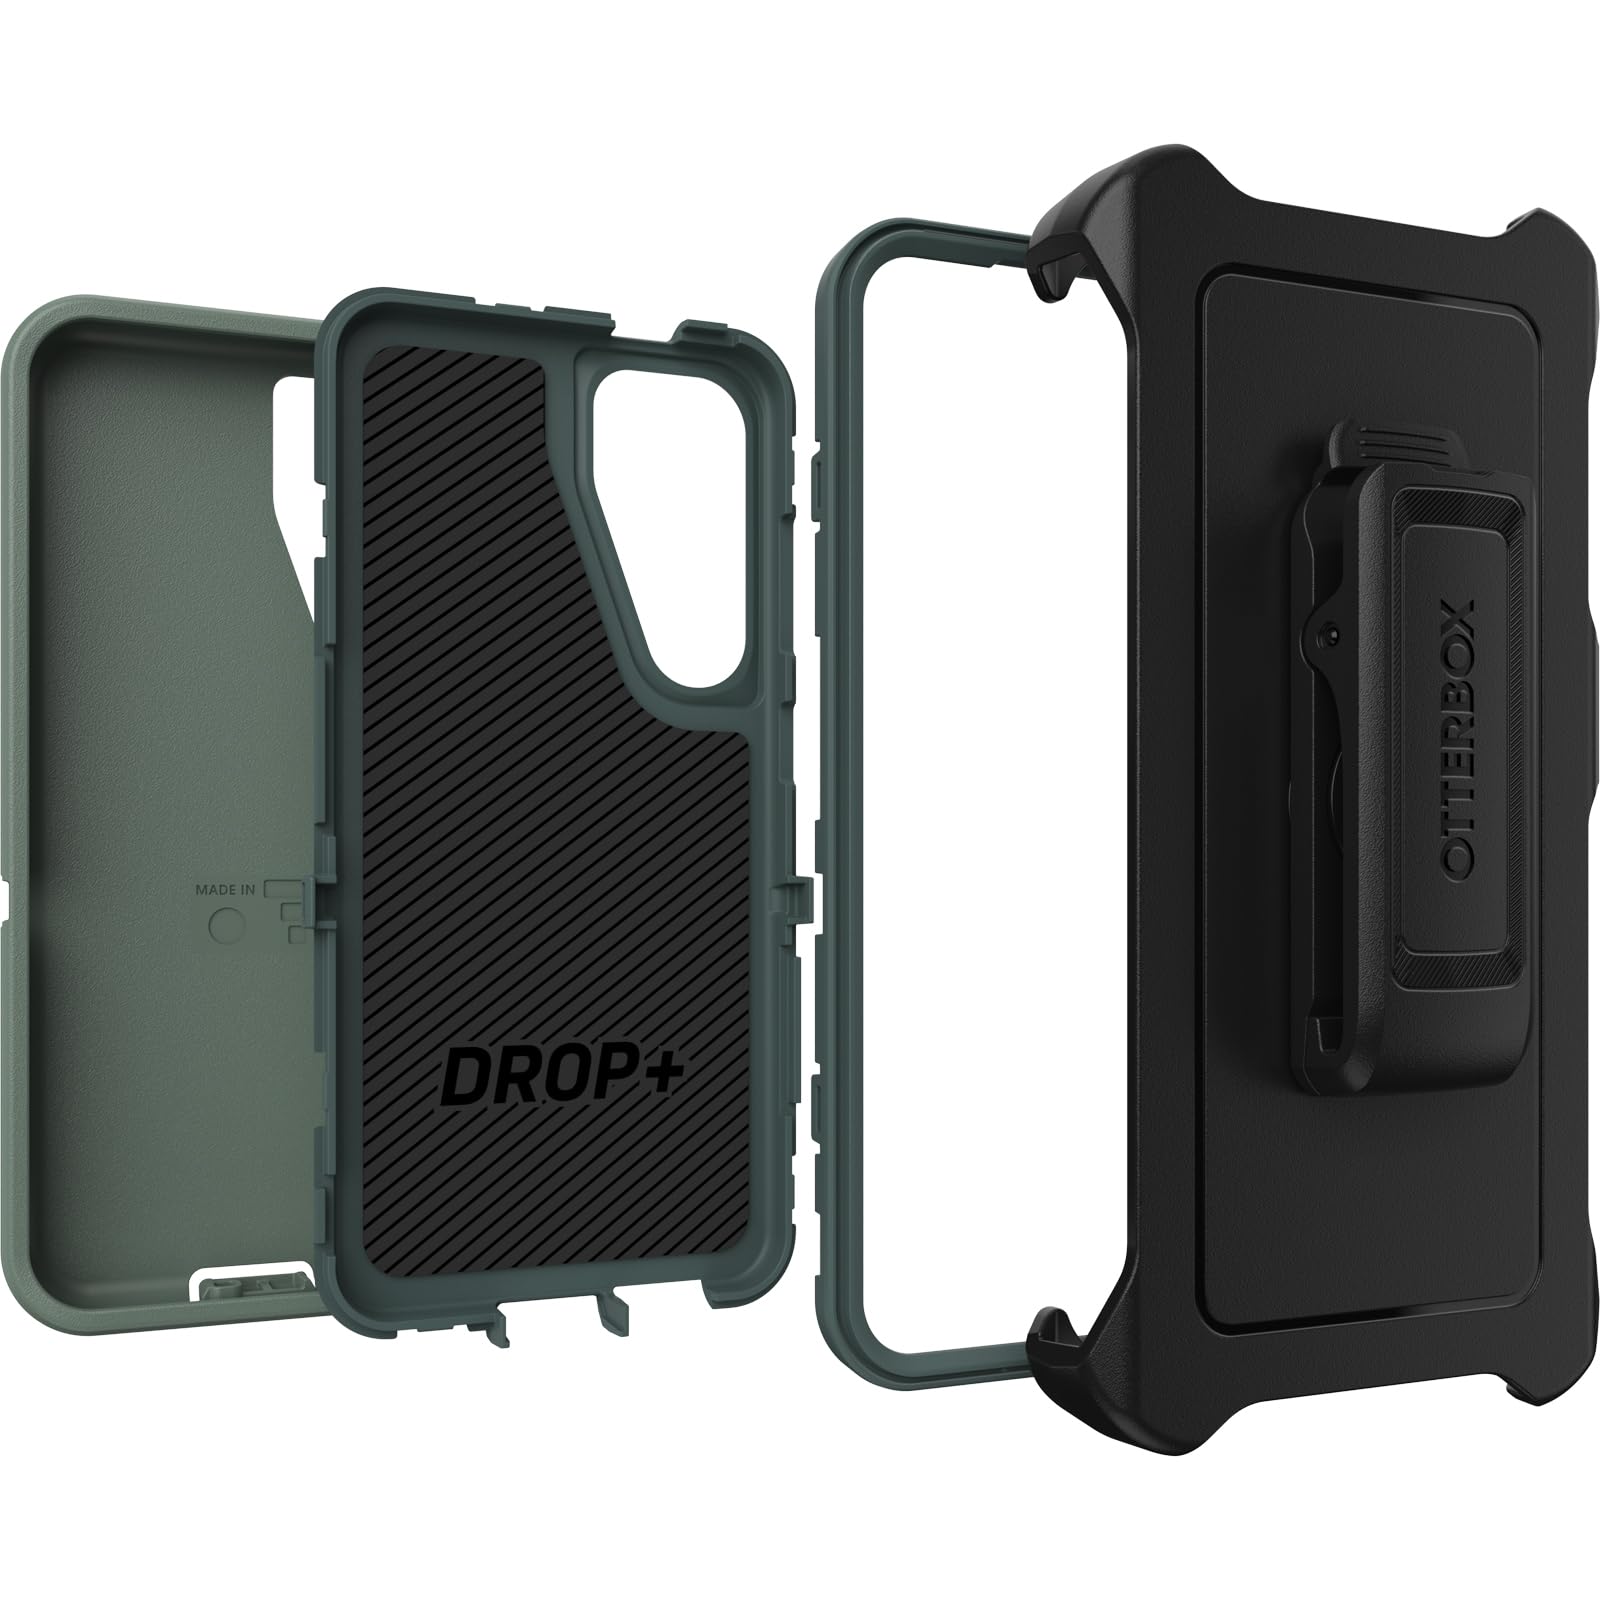 OtterBox Samsung Galaxy S24 Defender Series Case - Forest Ranger (Green), Rugged & Durable, with Port Protection, Includes Holster Clip Kickstand